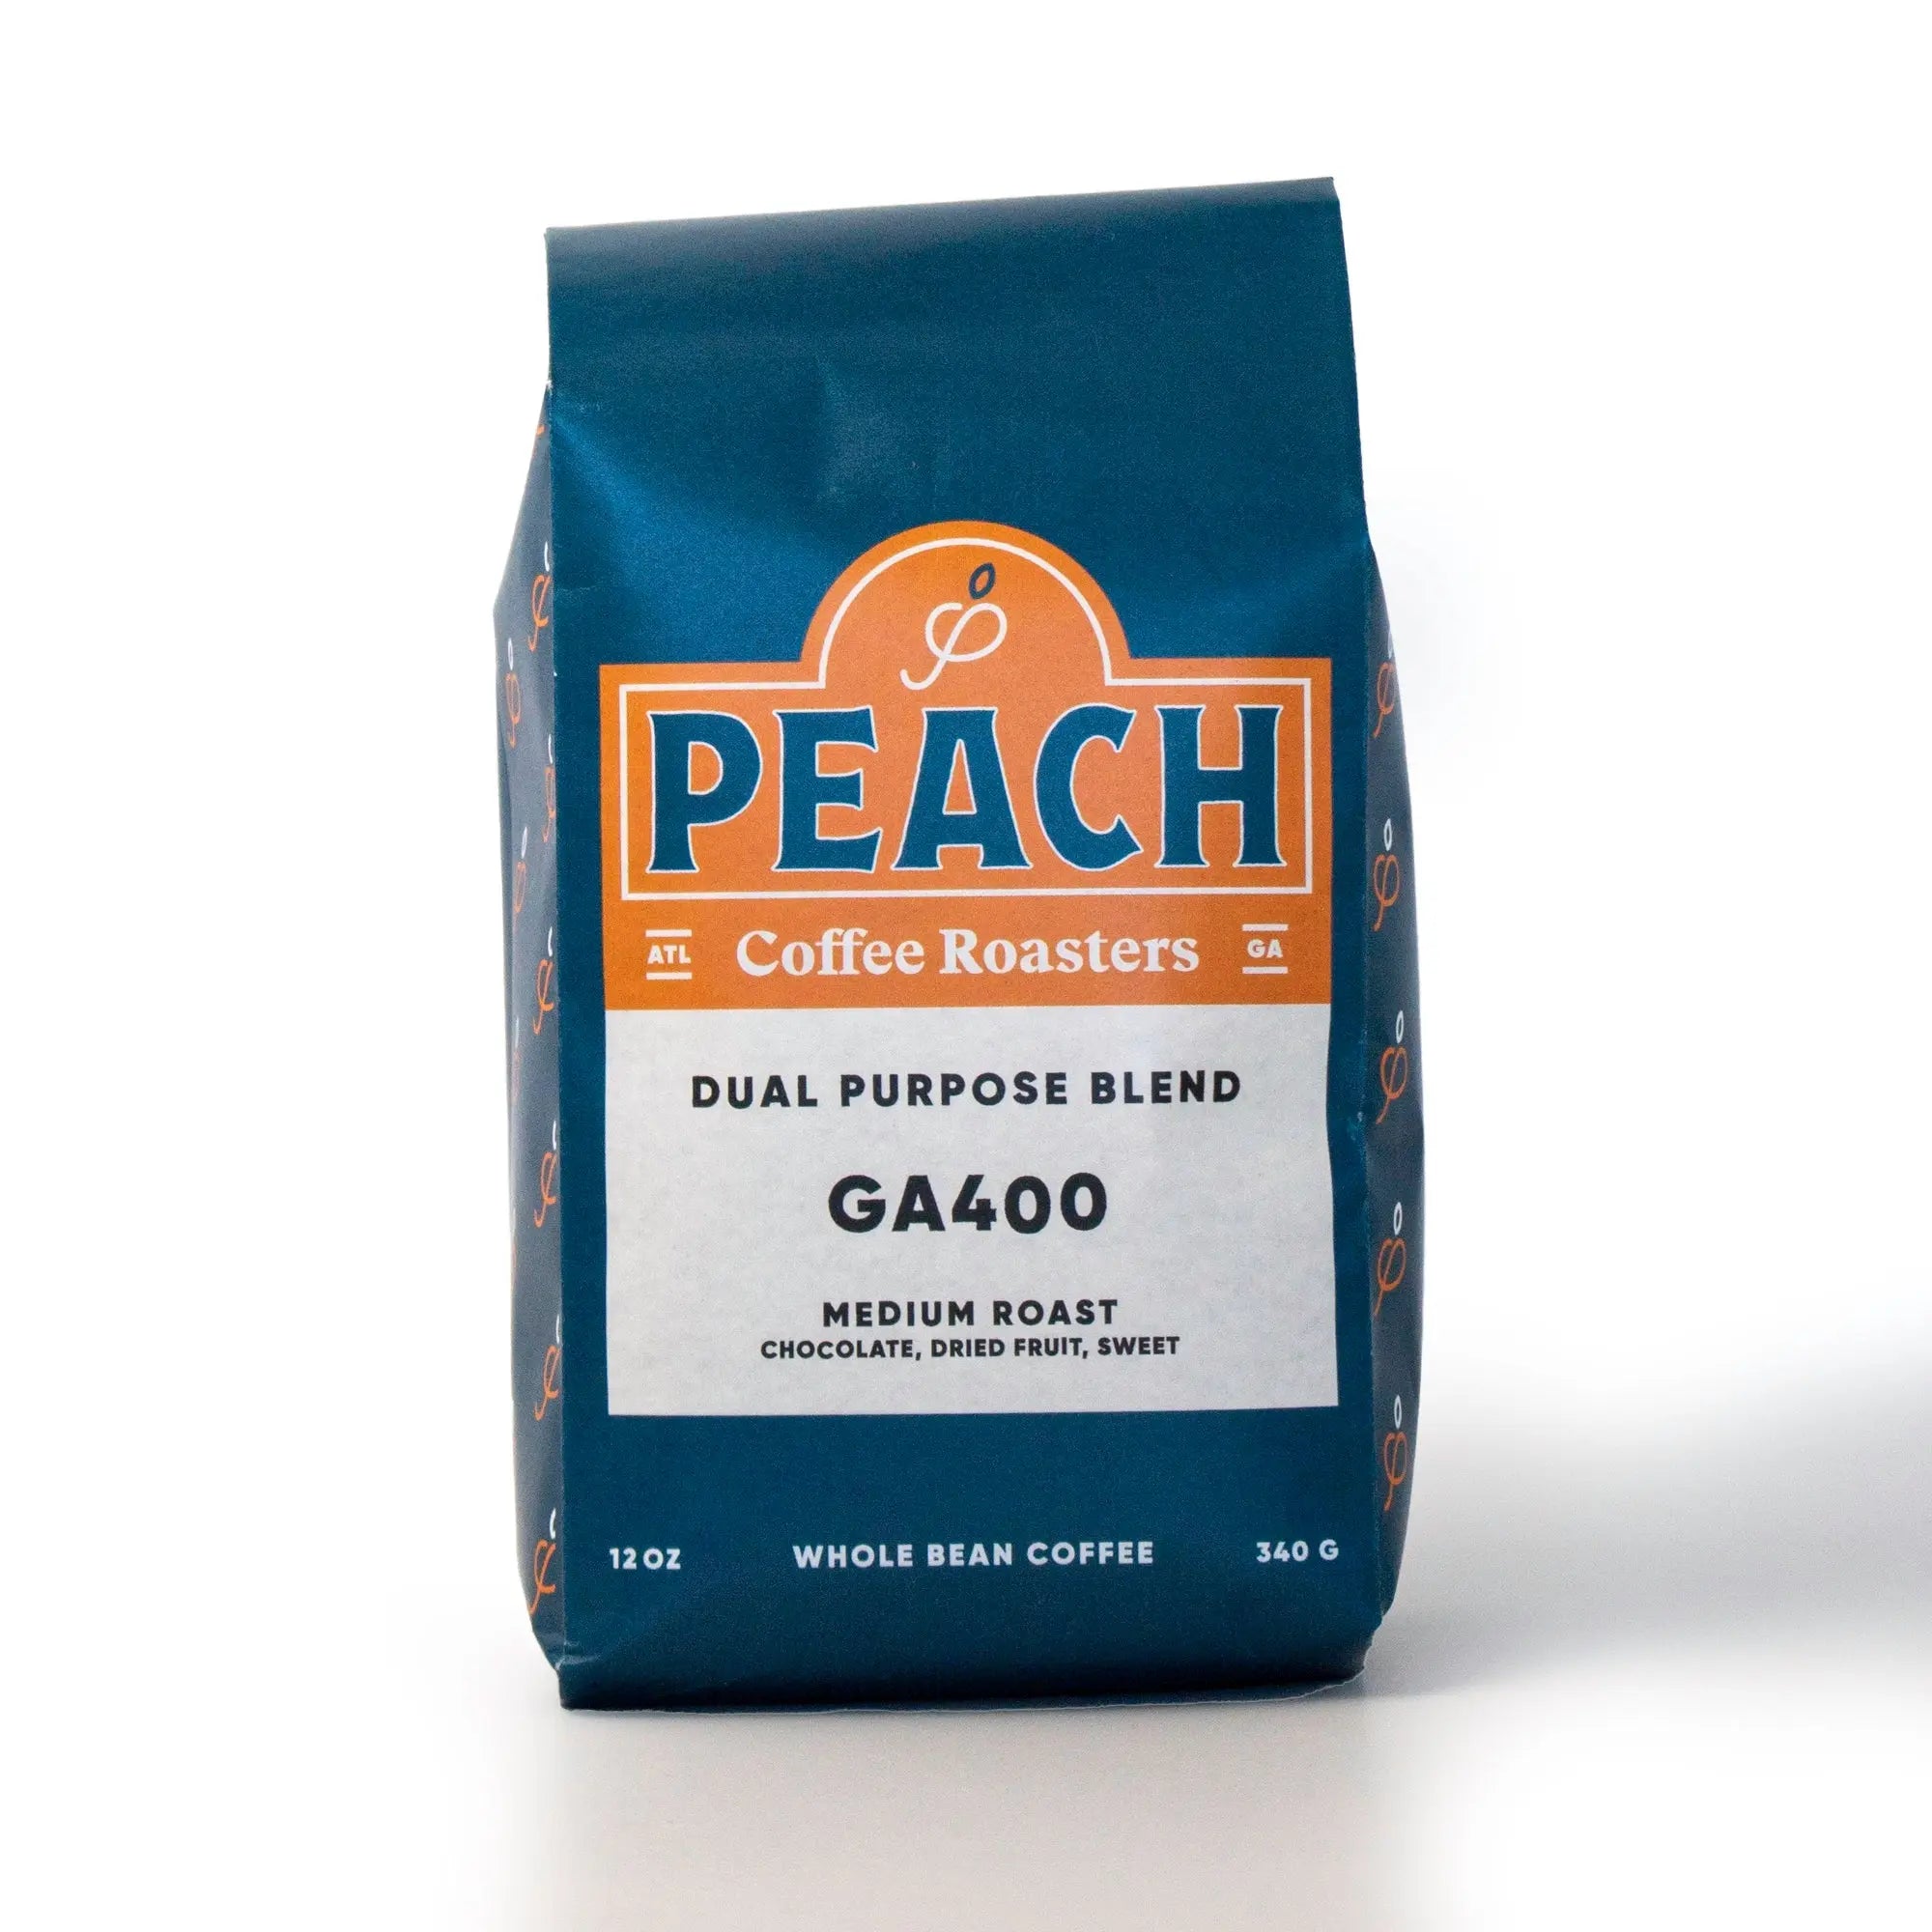 12 Month Coffee Gift Subscription - Shipping Included Peach Coffee Roasters